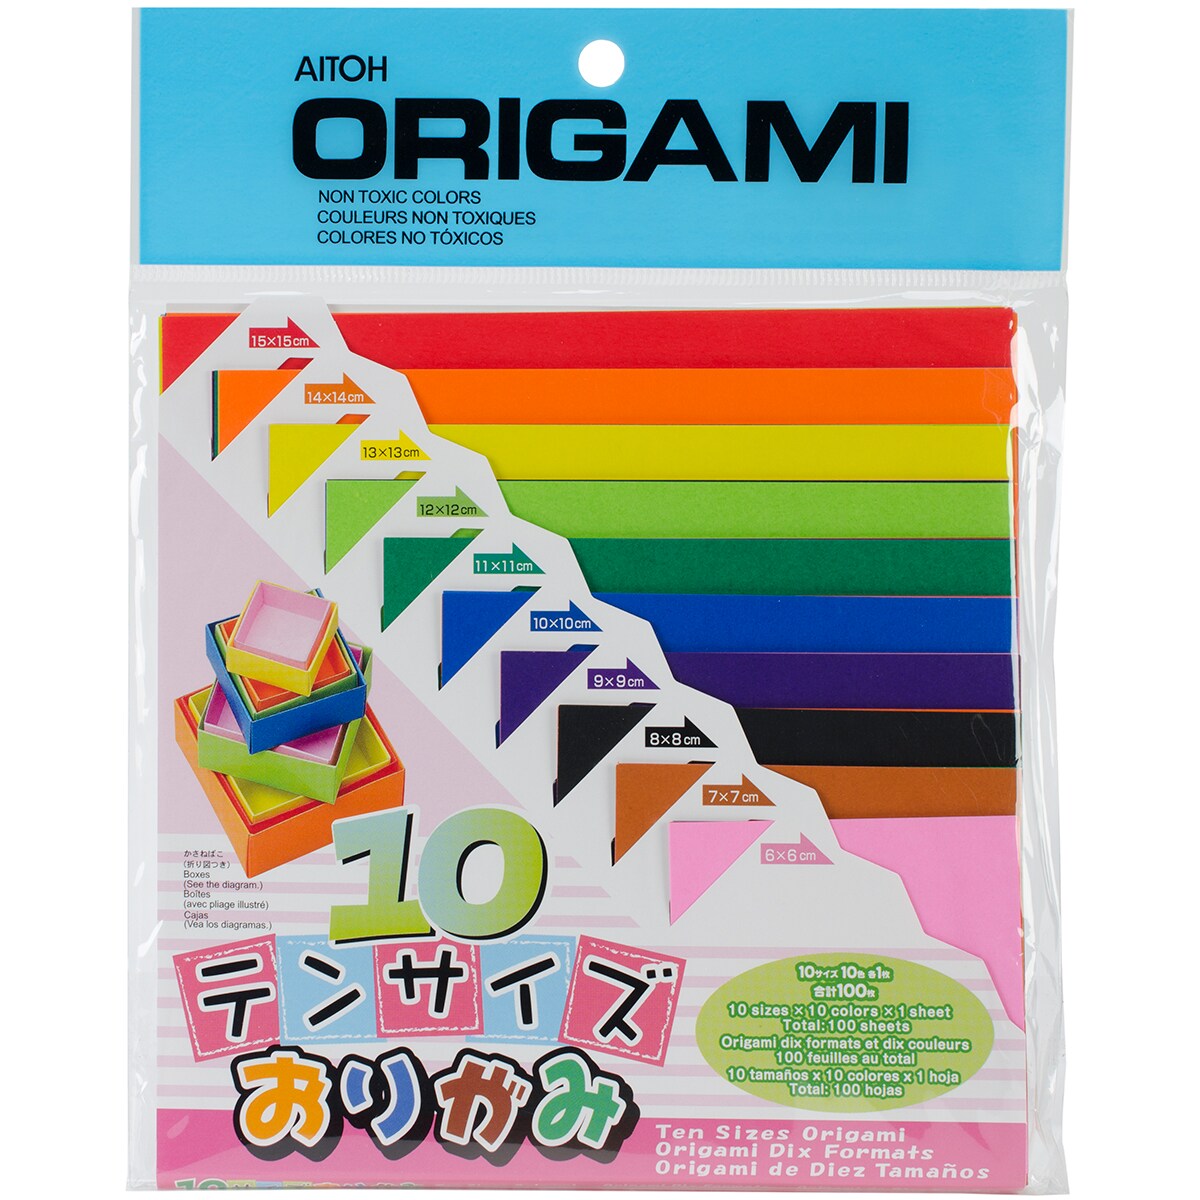 Aitoh Origami Paper 100/PkgAssorted Colors & Sizes Michaels